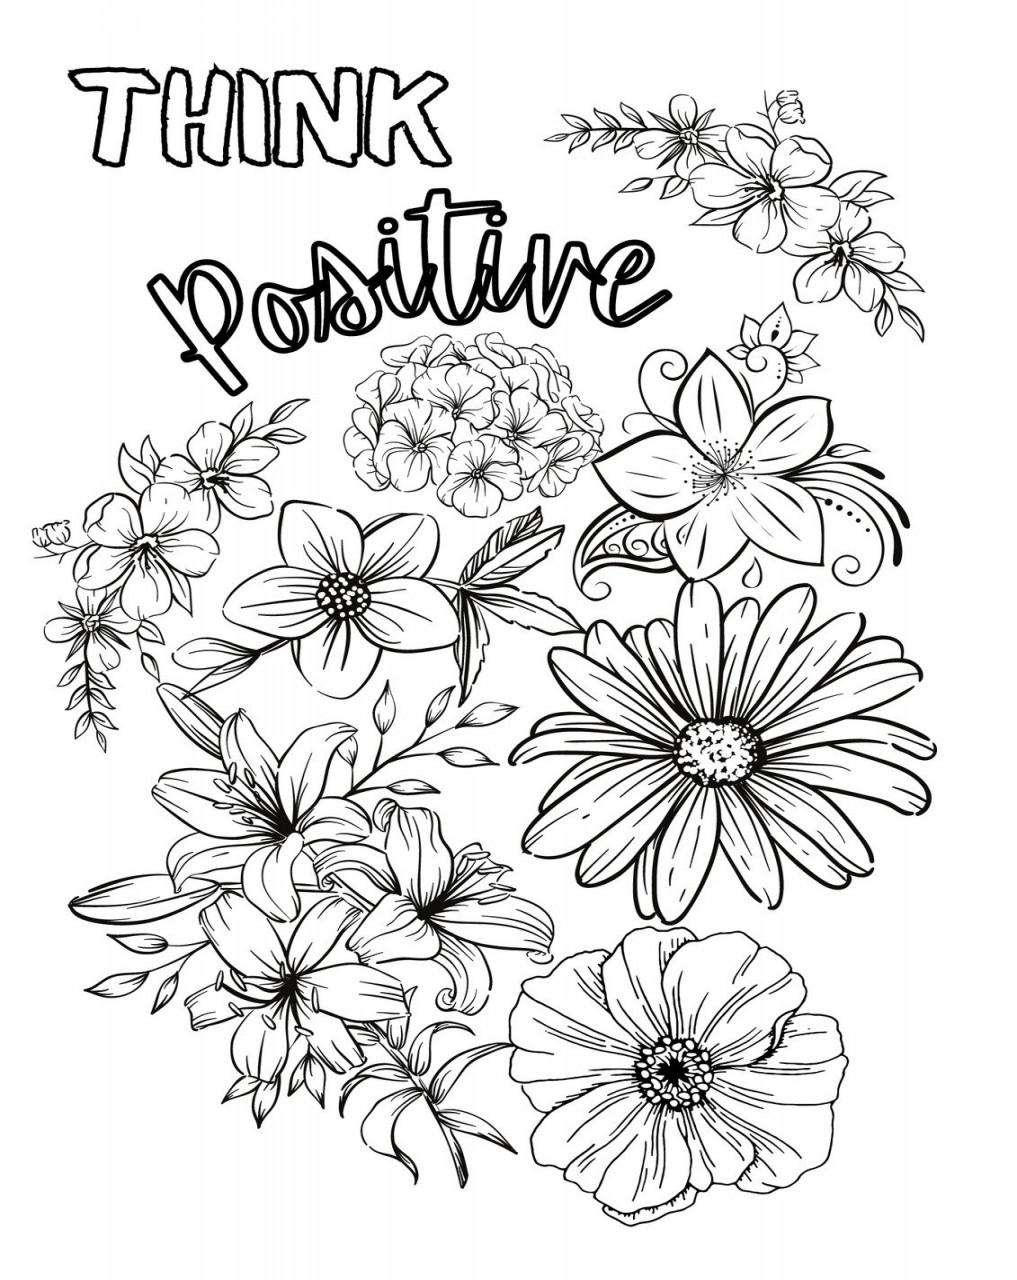 Free printable coloring page templates to customize  Canva